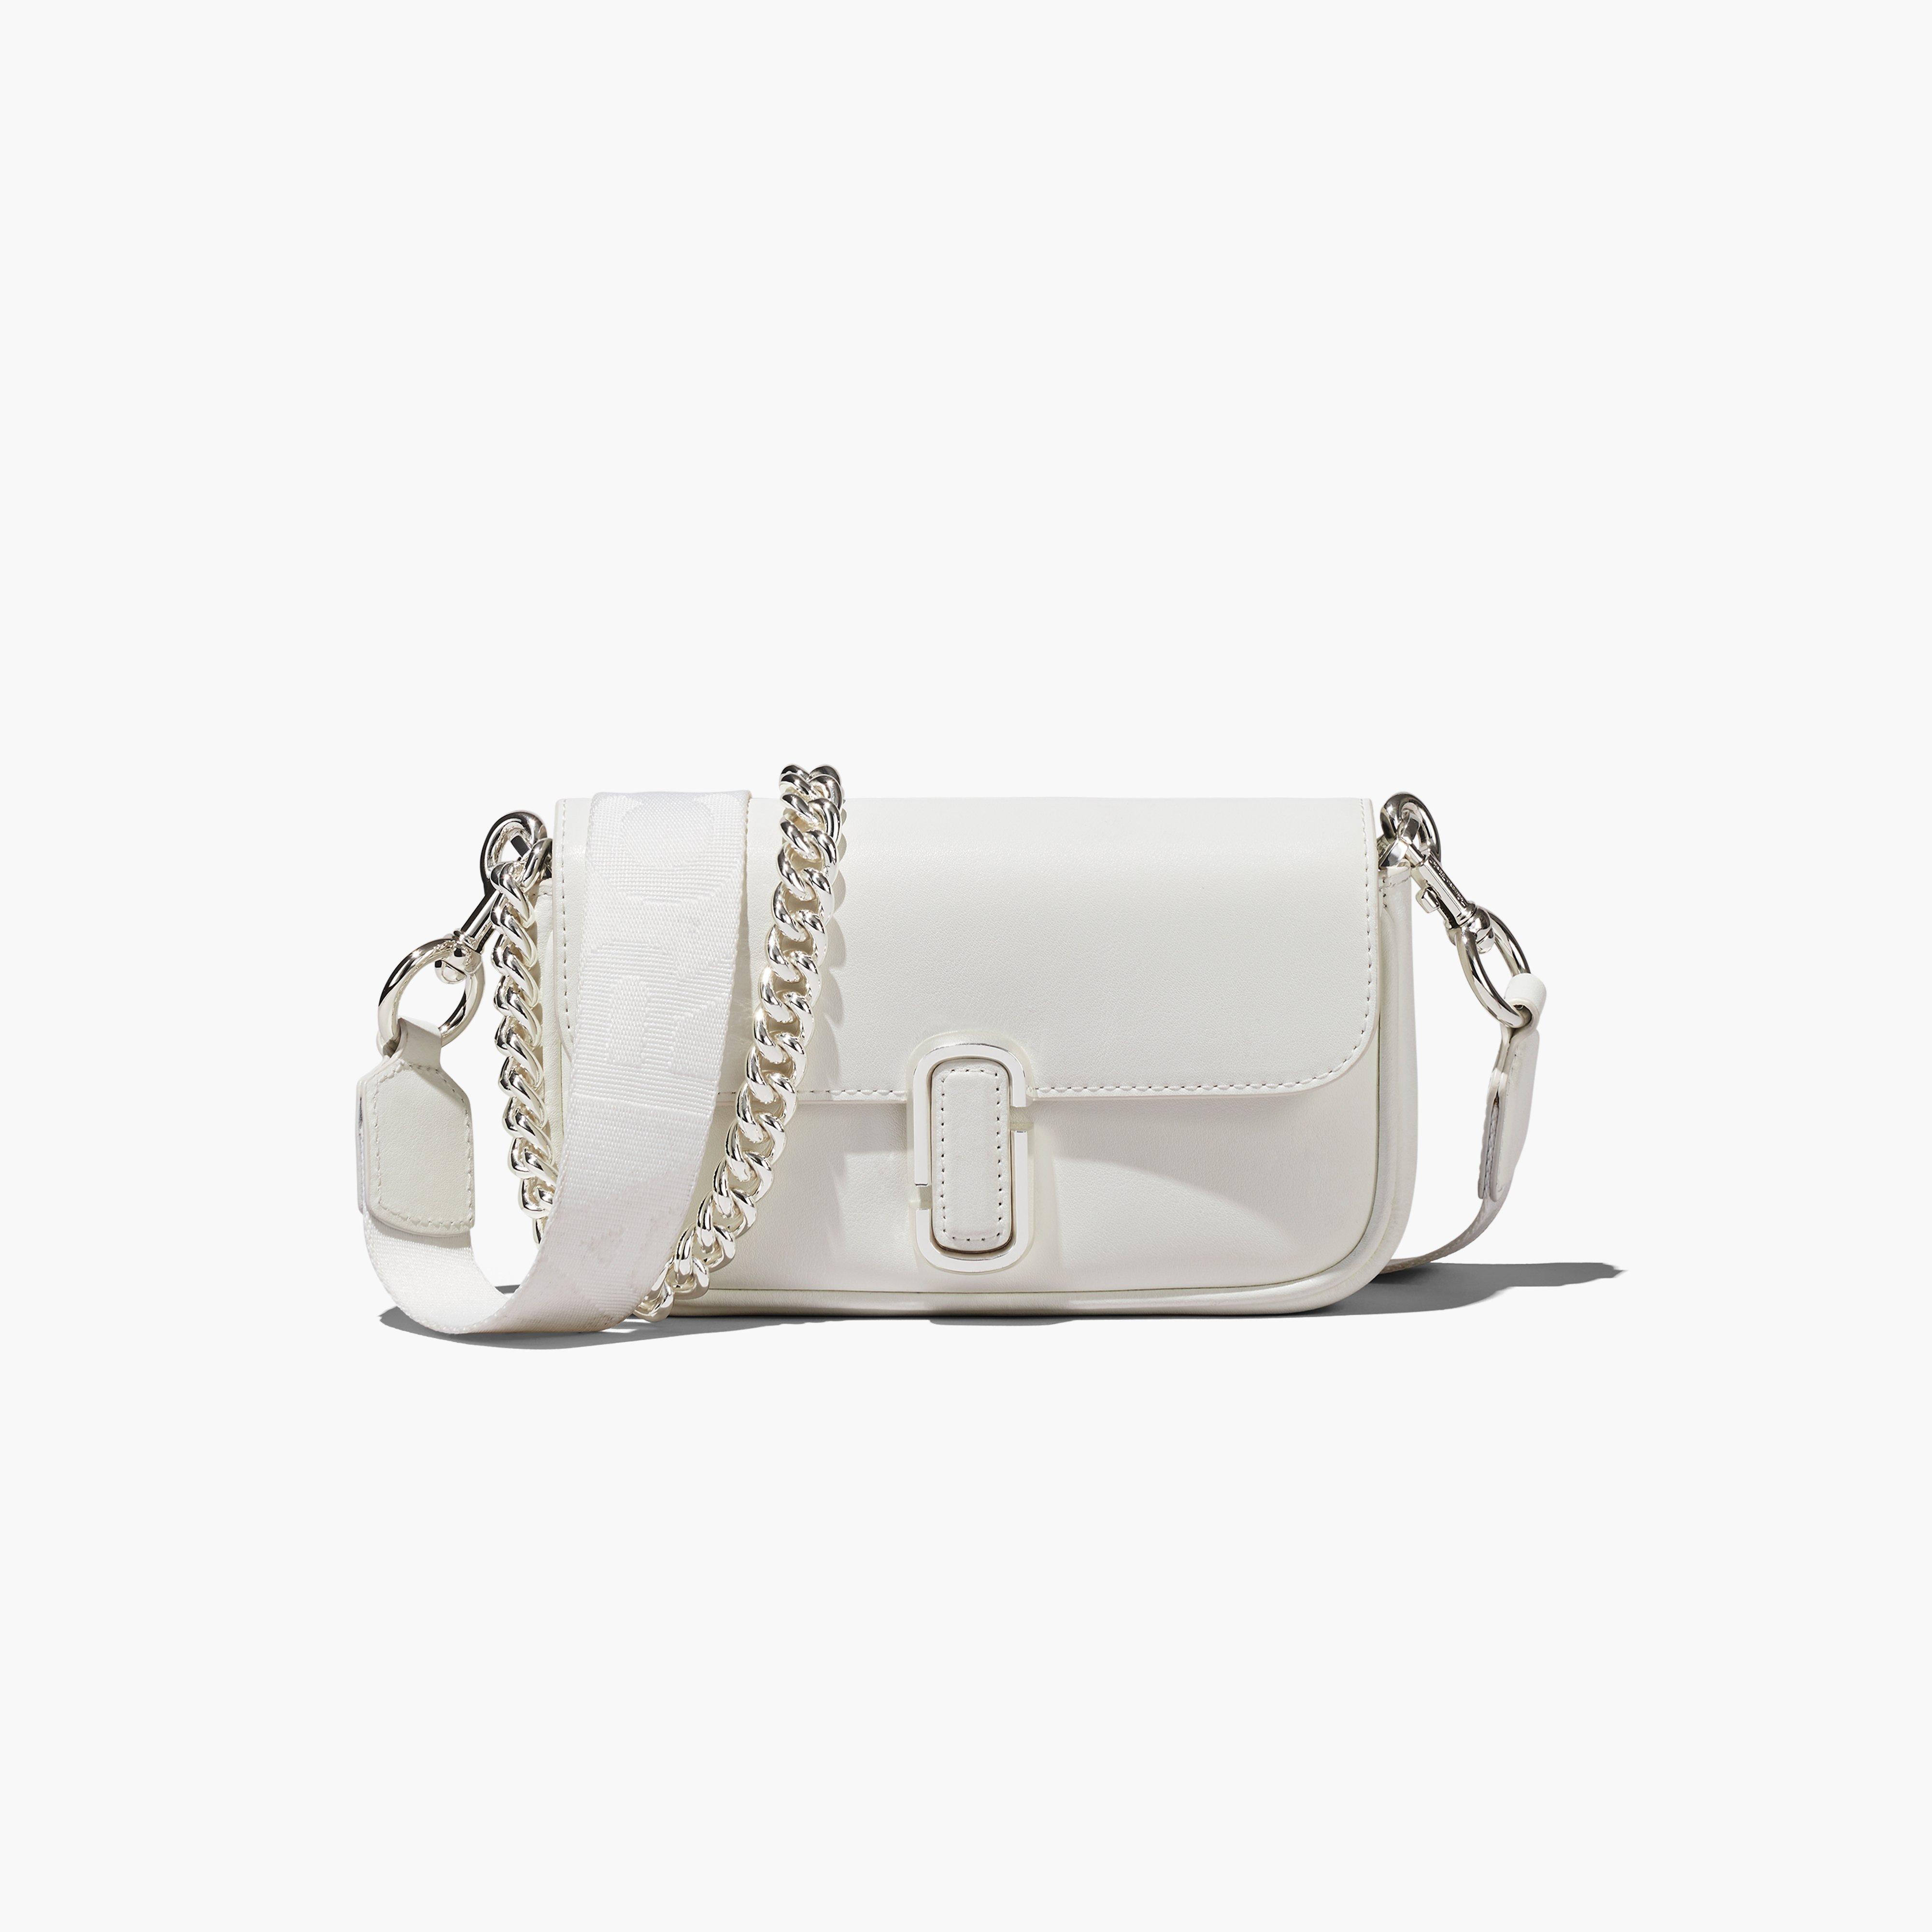 Marc by Marc jacobs The J Marc Mini Bag,WHITE/SILVER